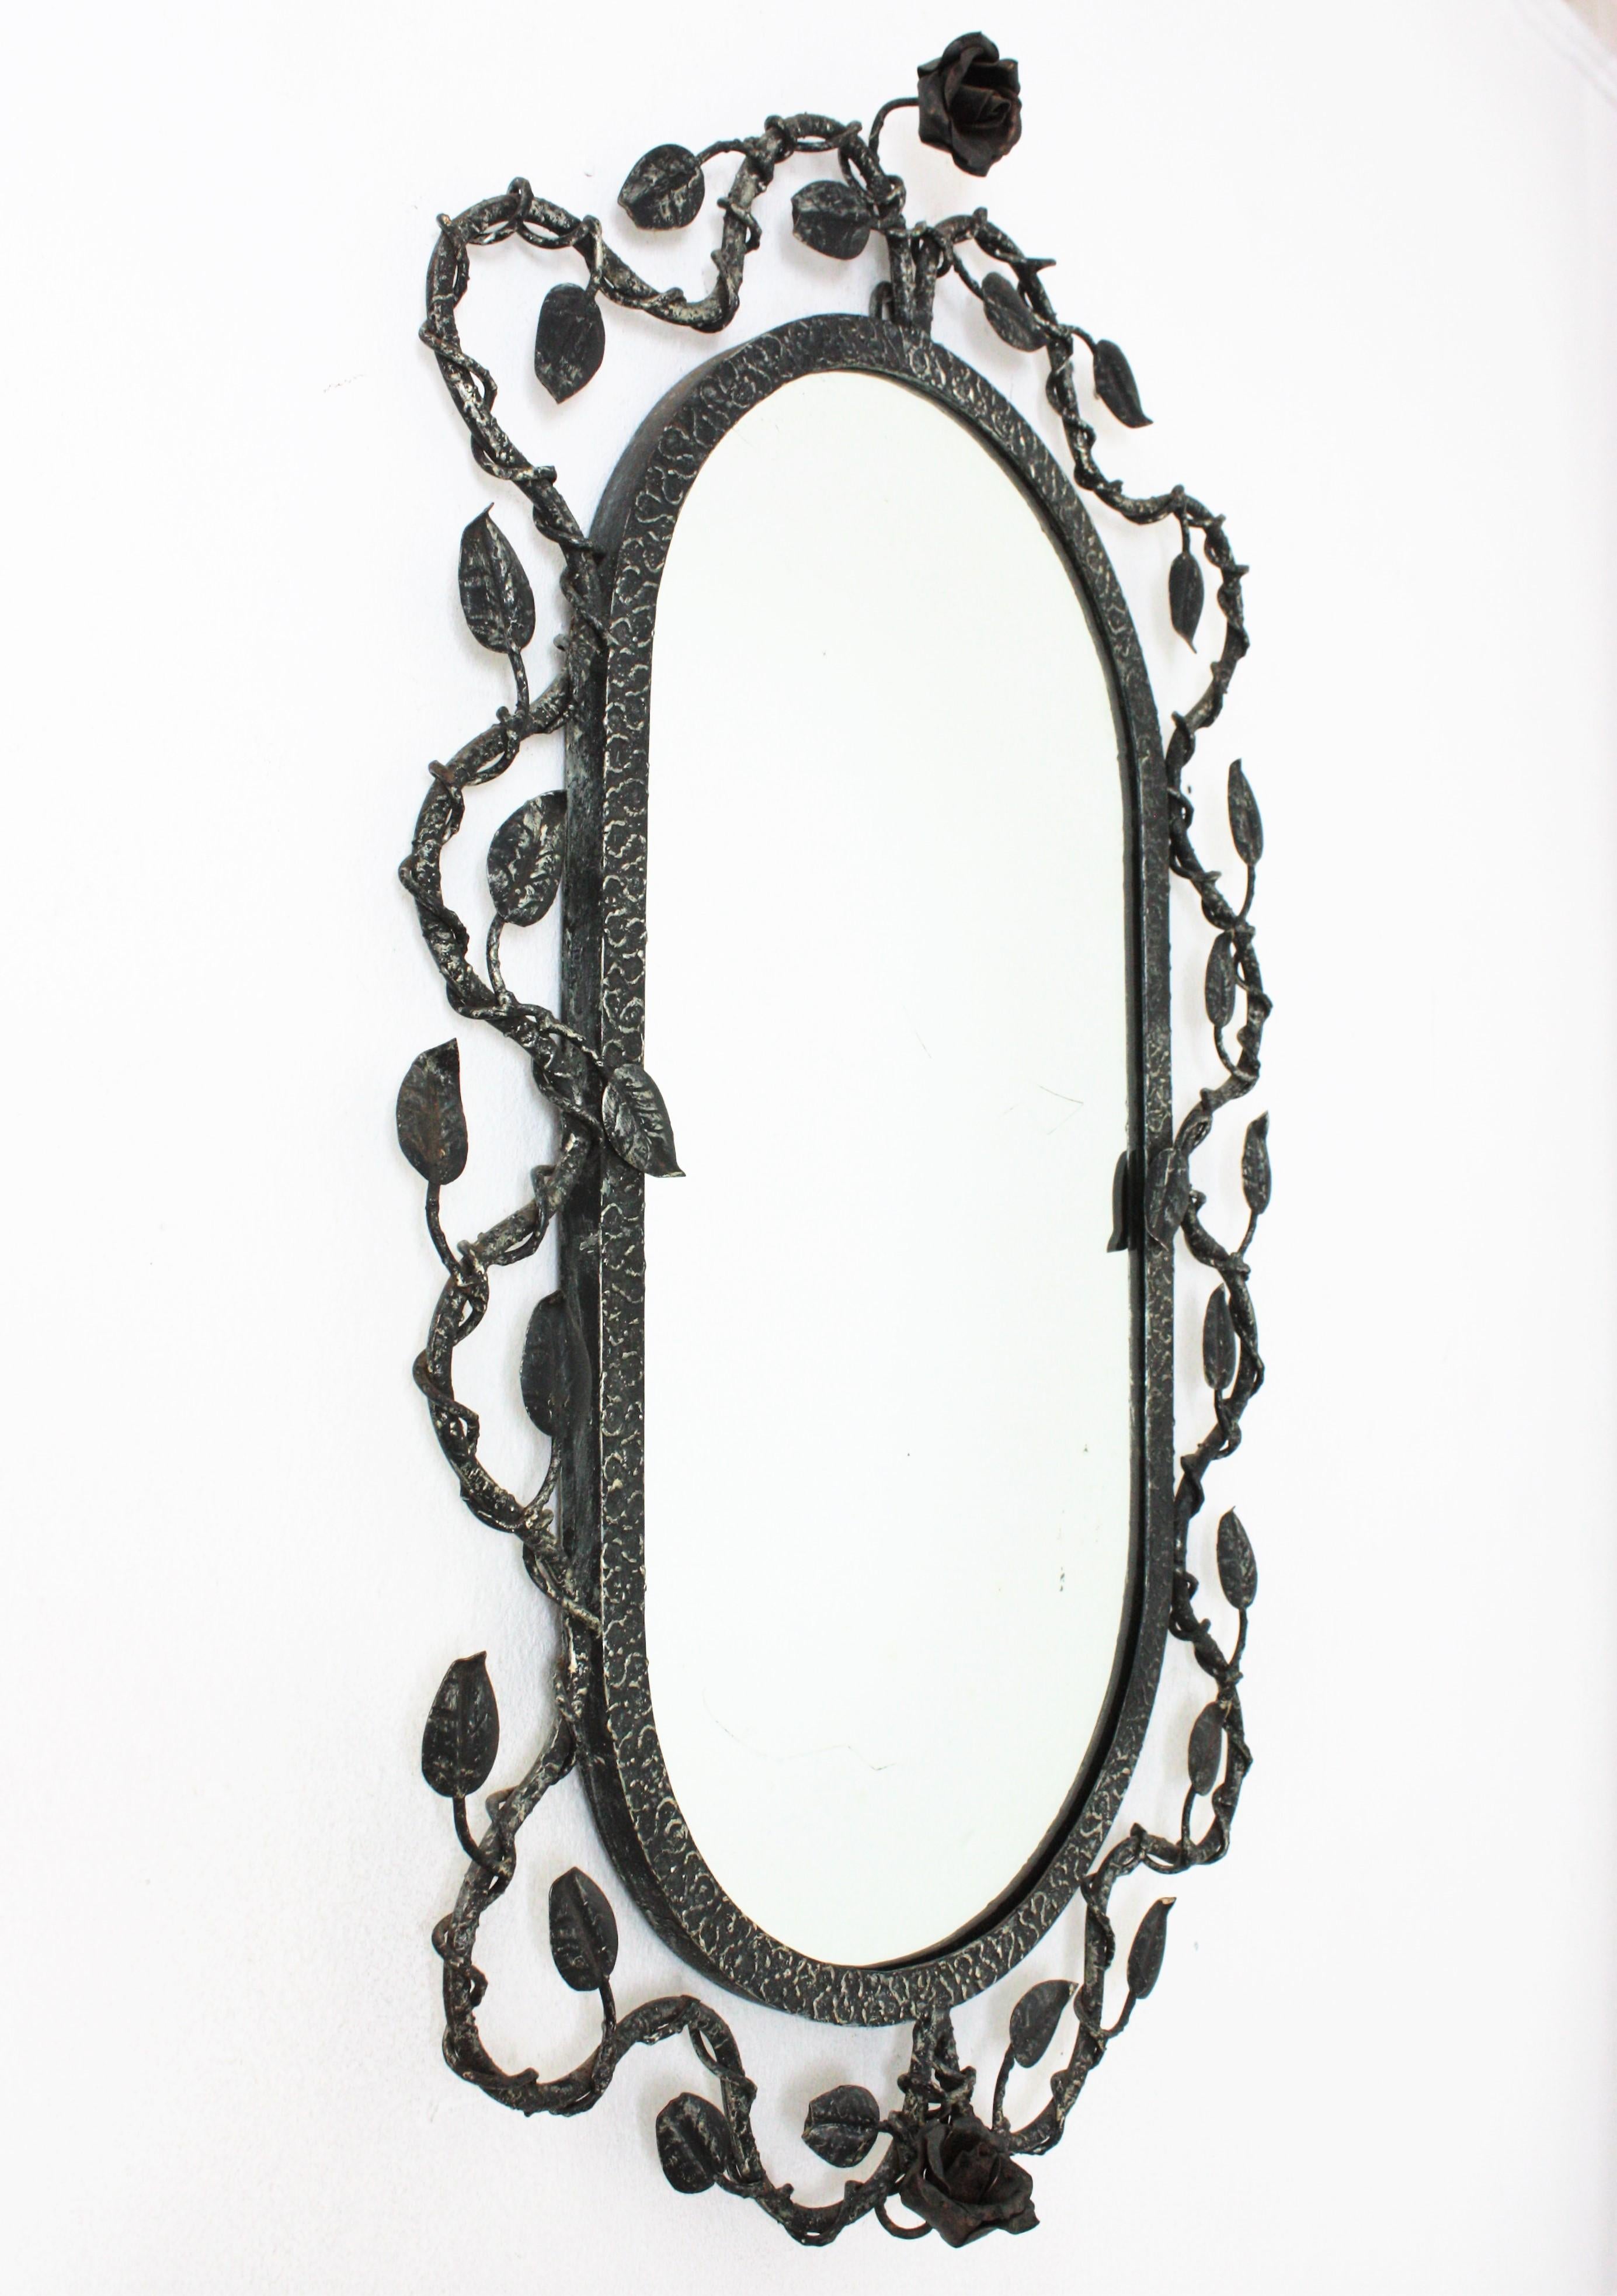 Hollywood Regency Oval Mirror with Foliage Floral Motif, Hand Forged Patinated Iron